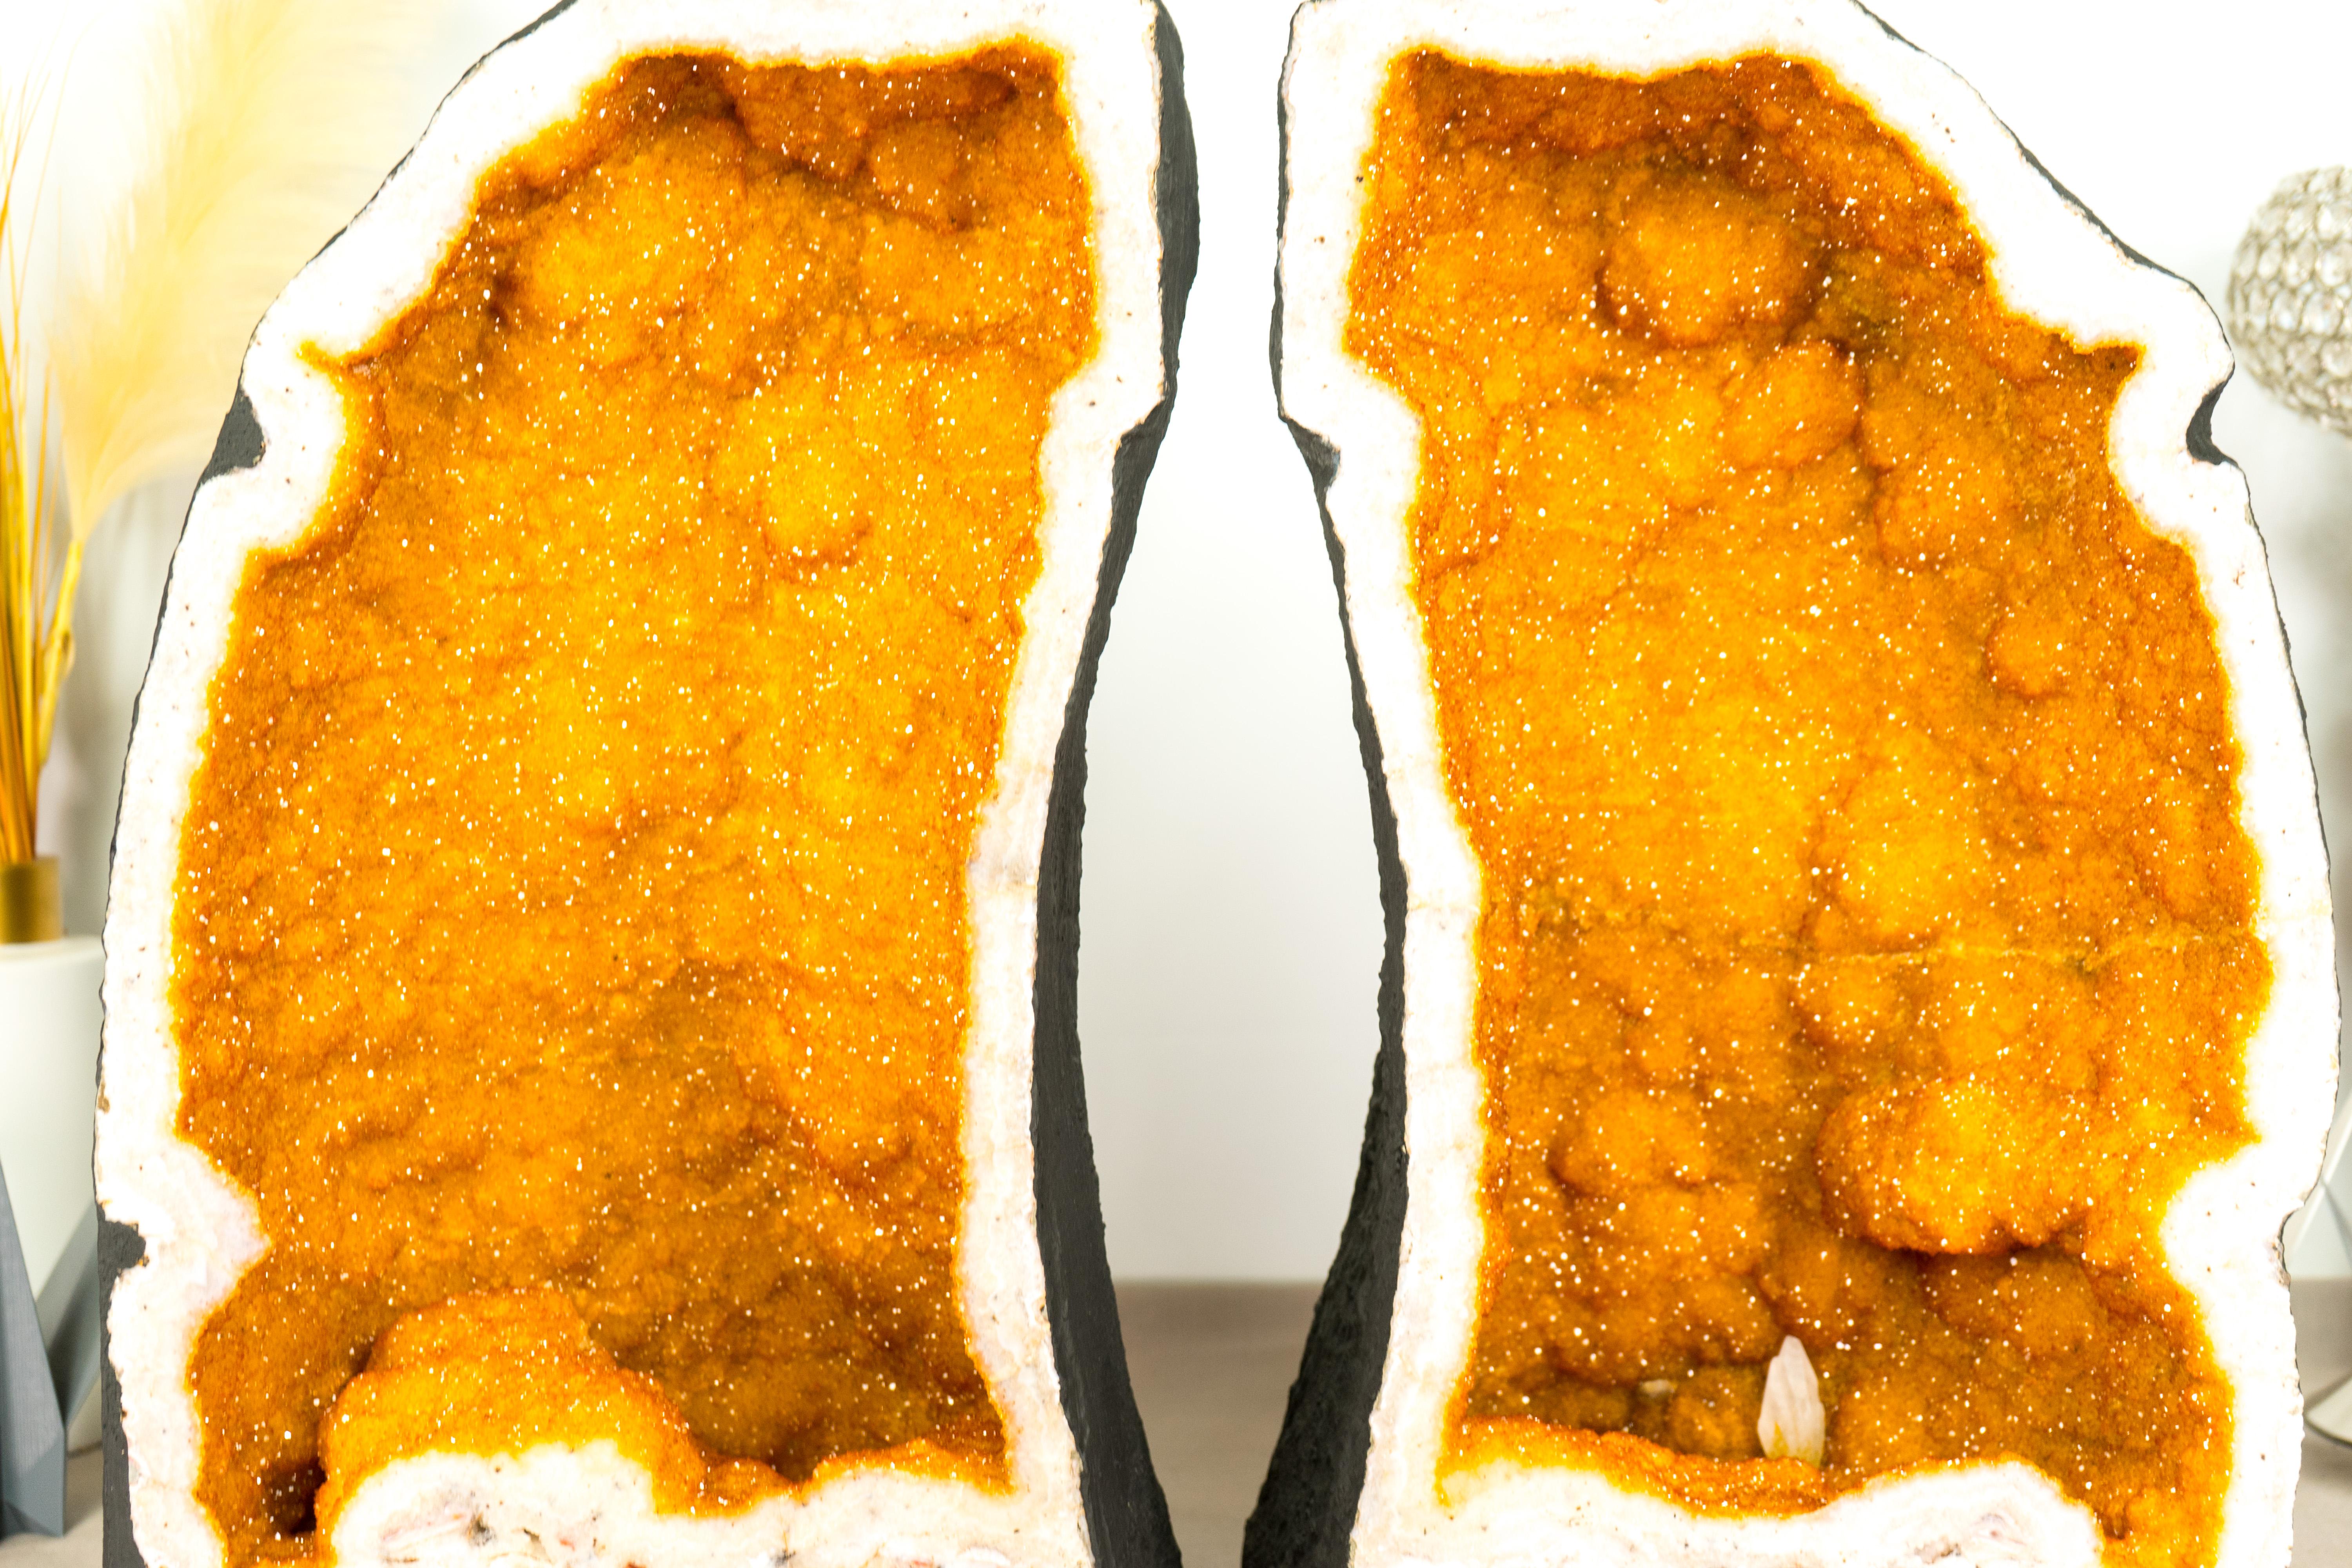 Brazilian Pair of Rare Book-matching Citrine Geodes with Shiny Golden Yellow Galaxy Druzy For Sale